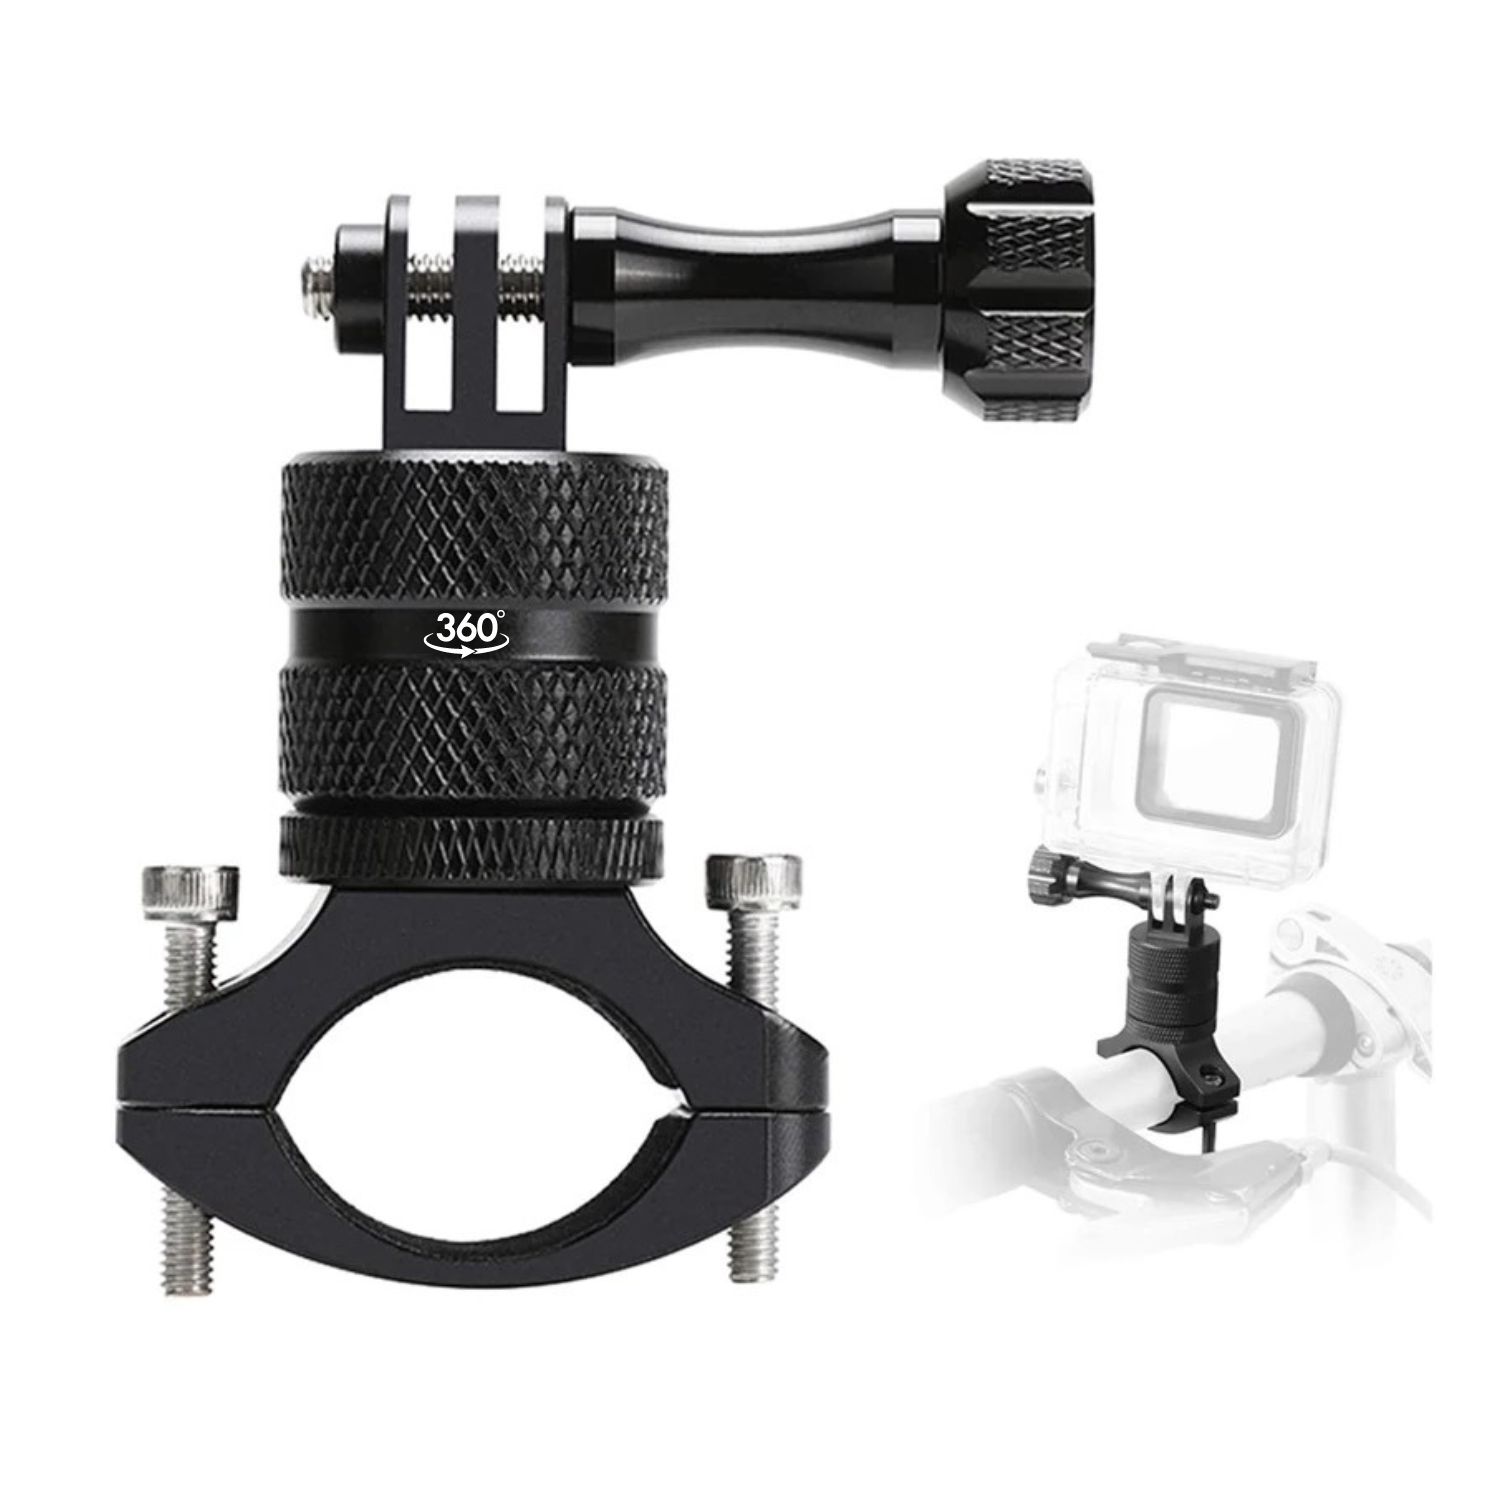 Handlebar Action Camera Mount for Bike | Bicycle Compatible with gopro | 360° Rotatable | Aluminium Alloy, Black